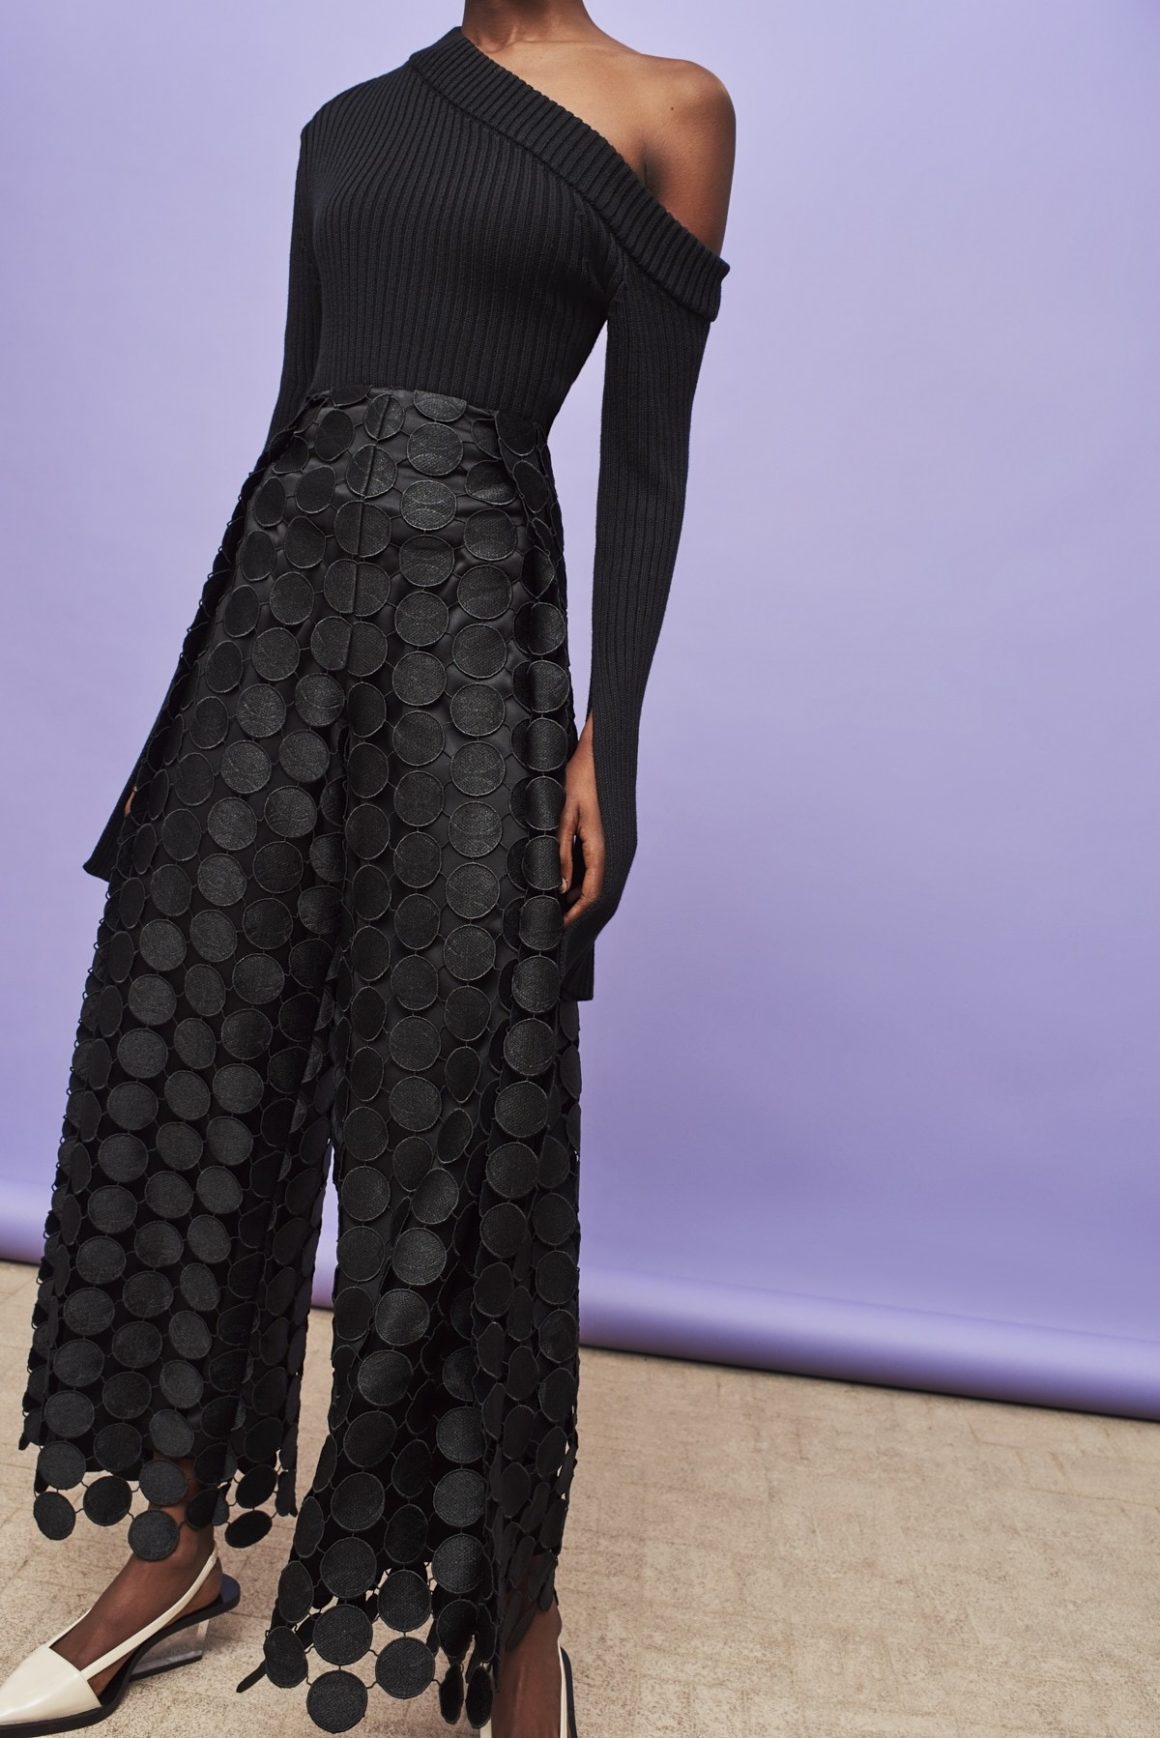 You Ask, We Answer: Tamron Hall Wears Black Circular Lace Cut Out Pants ...